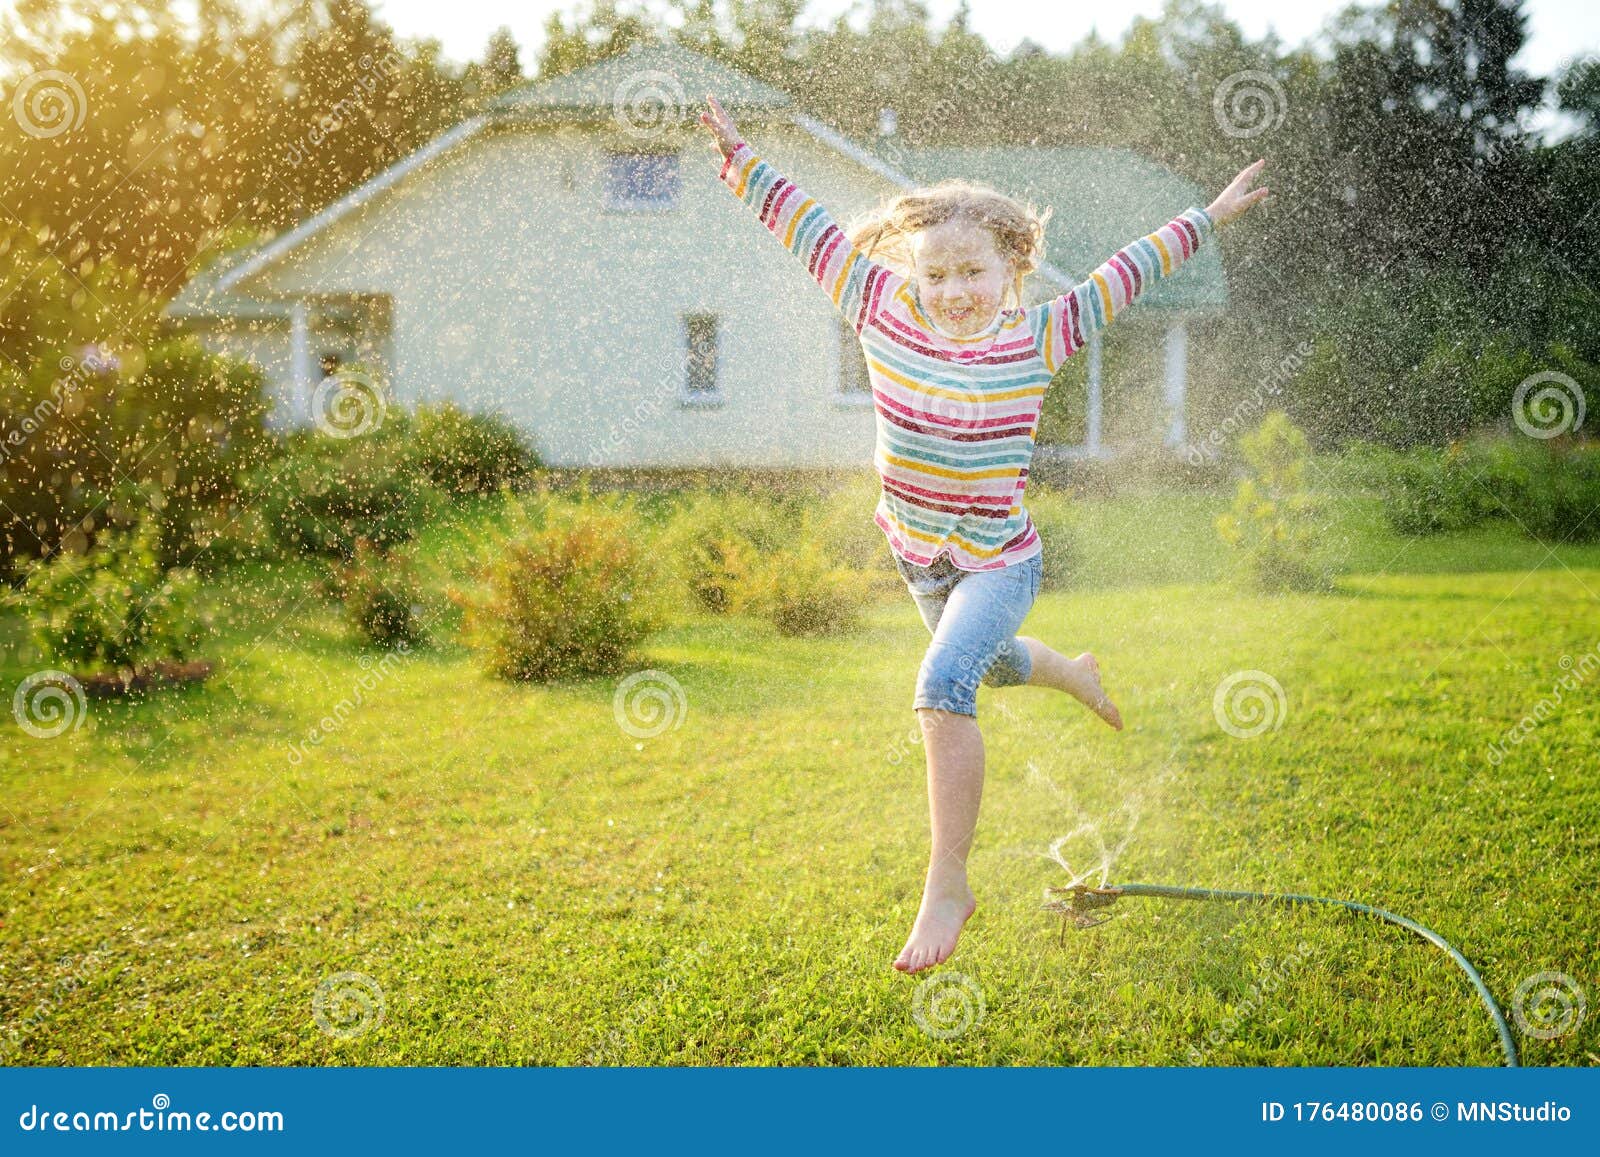 Adorable Girl Playing With A Sprinkler In A Backyard On 